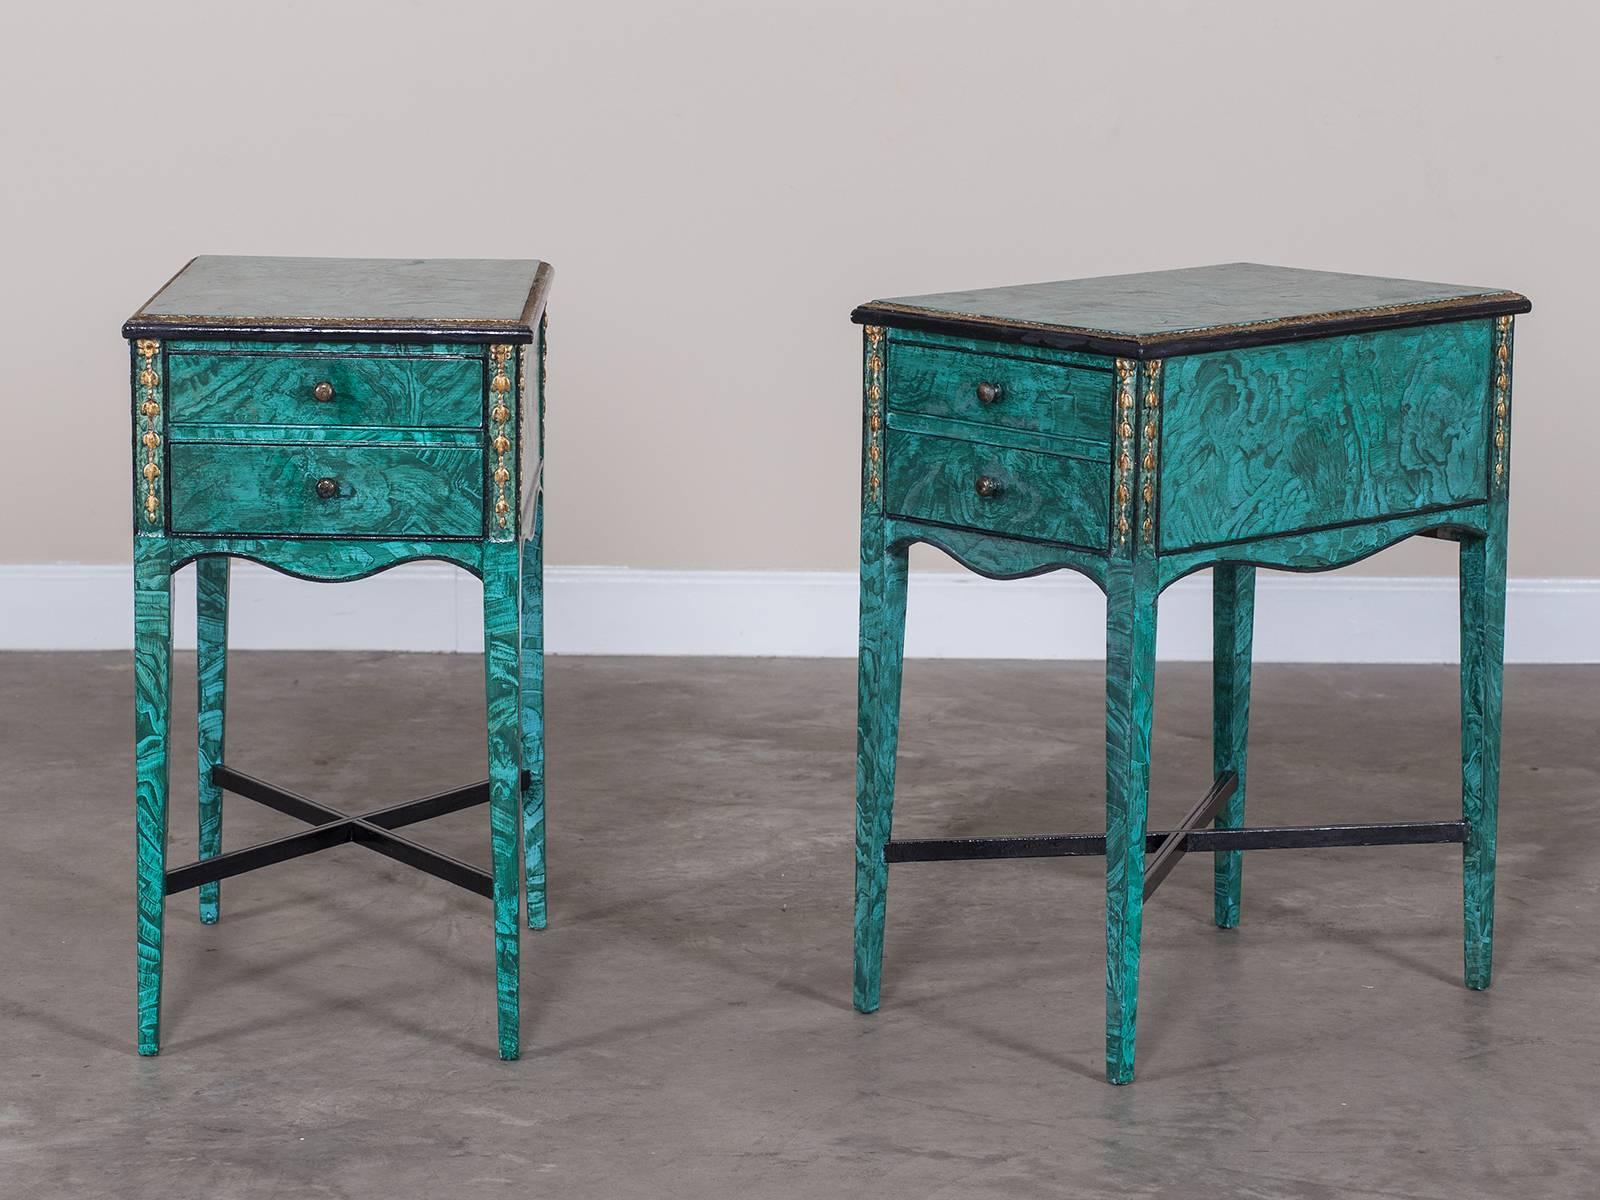 Receive our new selections direct from 1stdibs by email each week. Please click Follow Dealer below and see them first!

The bold faux Malachite painted finish of these vintage English side tables circa 1940 make them a statement piece in any